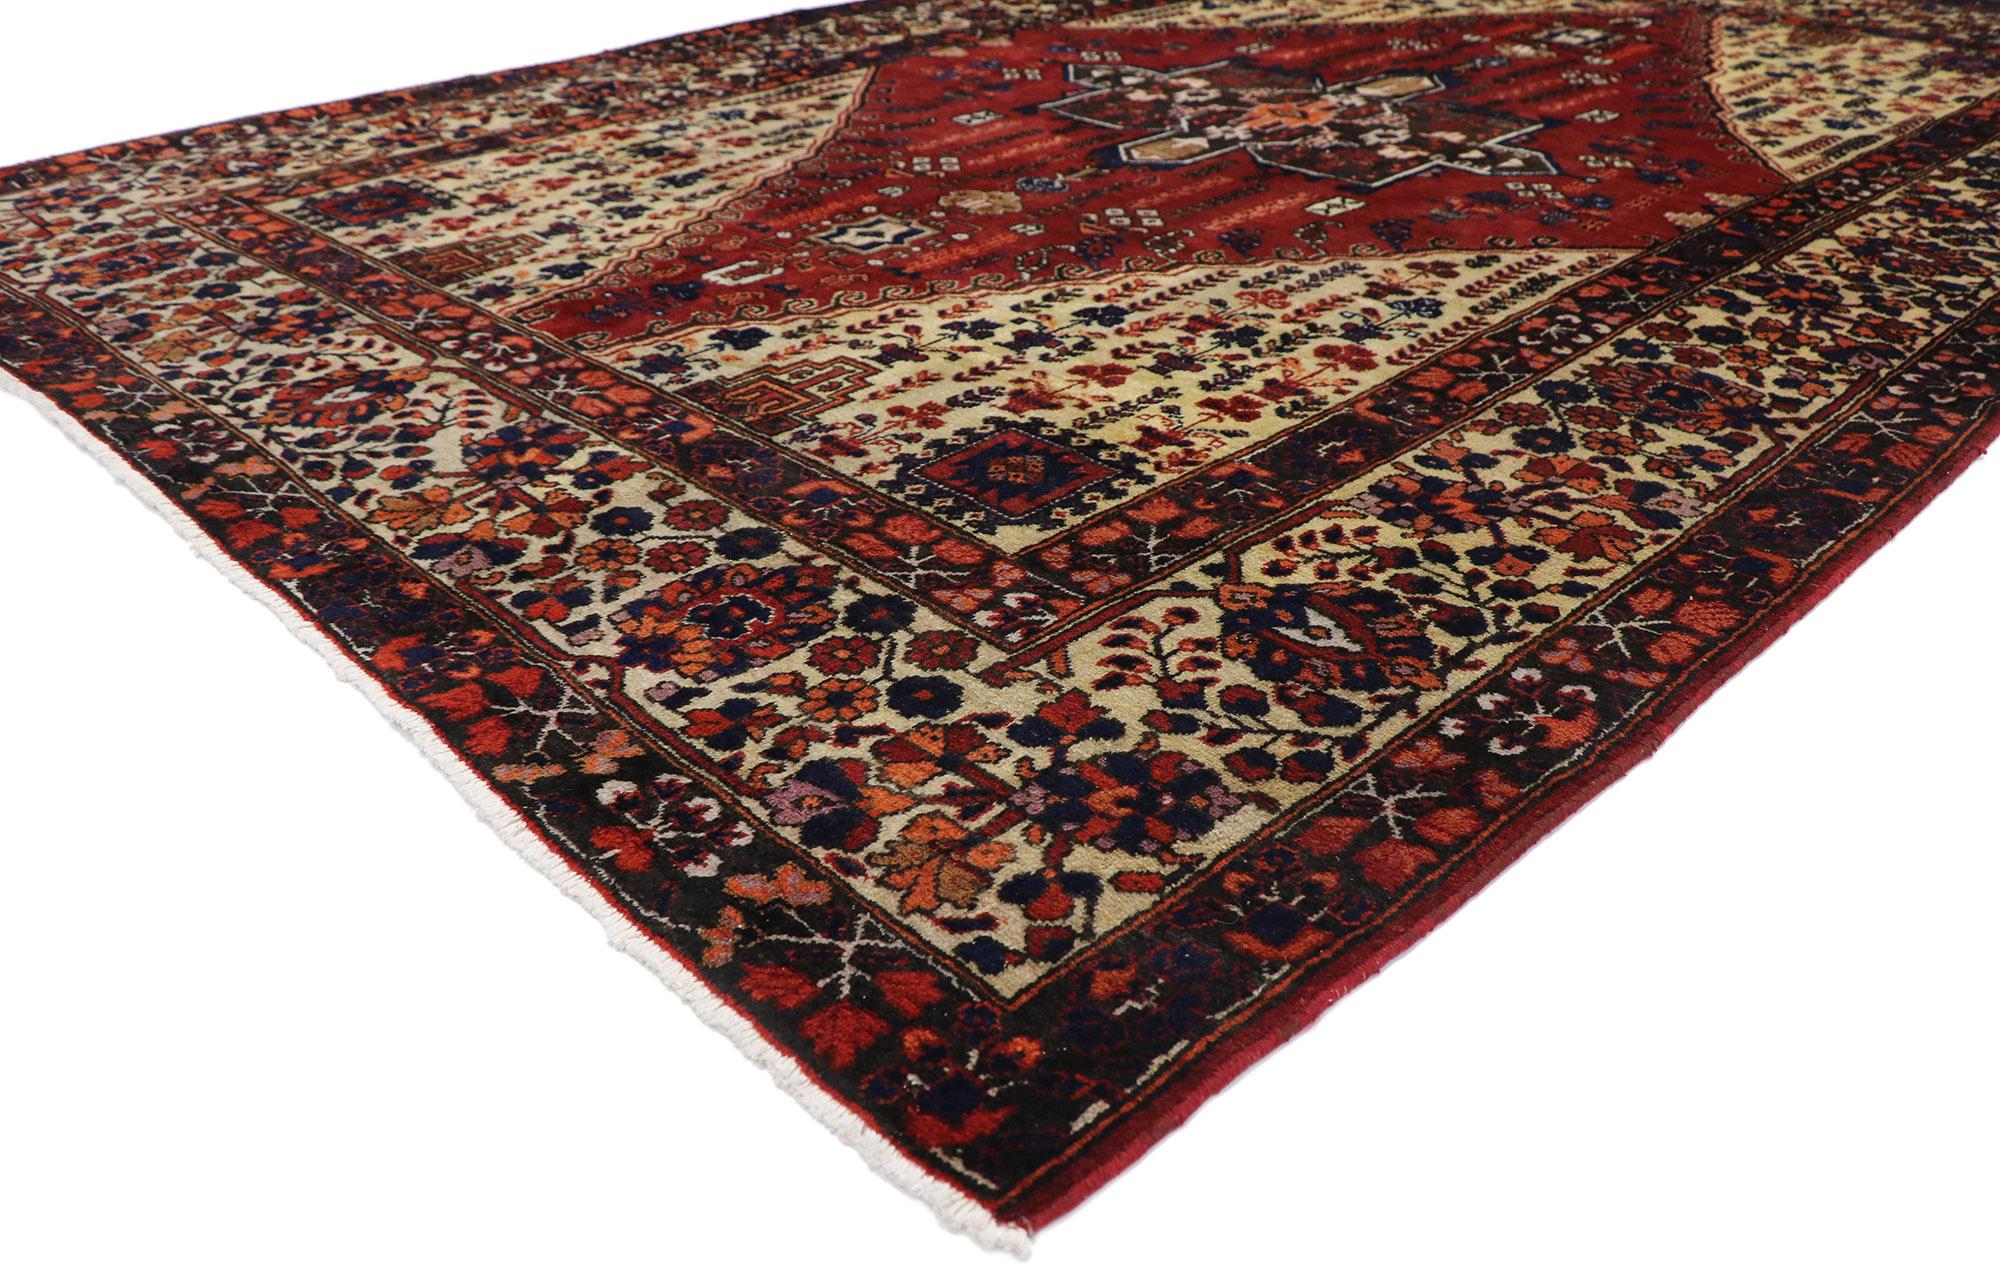 60928 Antique Caucasian Azerbaijan rug 07'00 x 10'00. Warm and inviting, this hand-knotted wool antique Caucasian Azerbaijan rug emanates nomadic charm with a hint of sophistication. The abrashed field features a large scale brick red lozenge